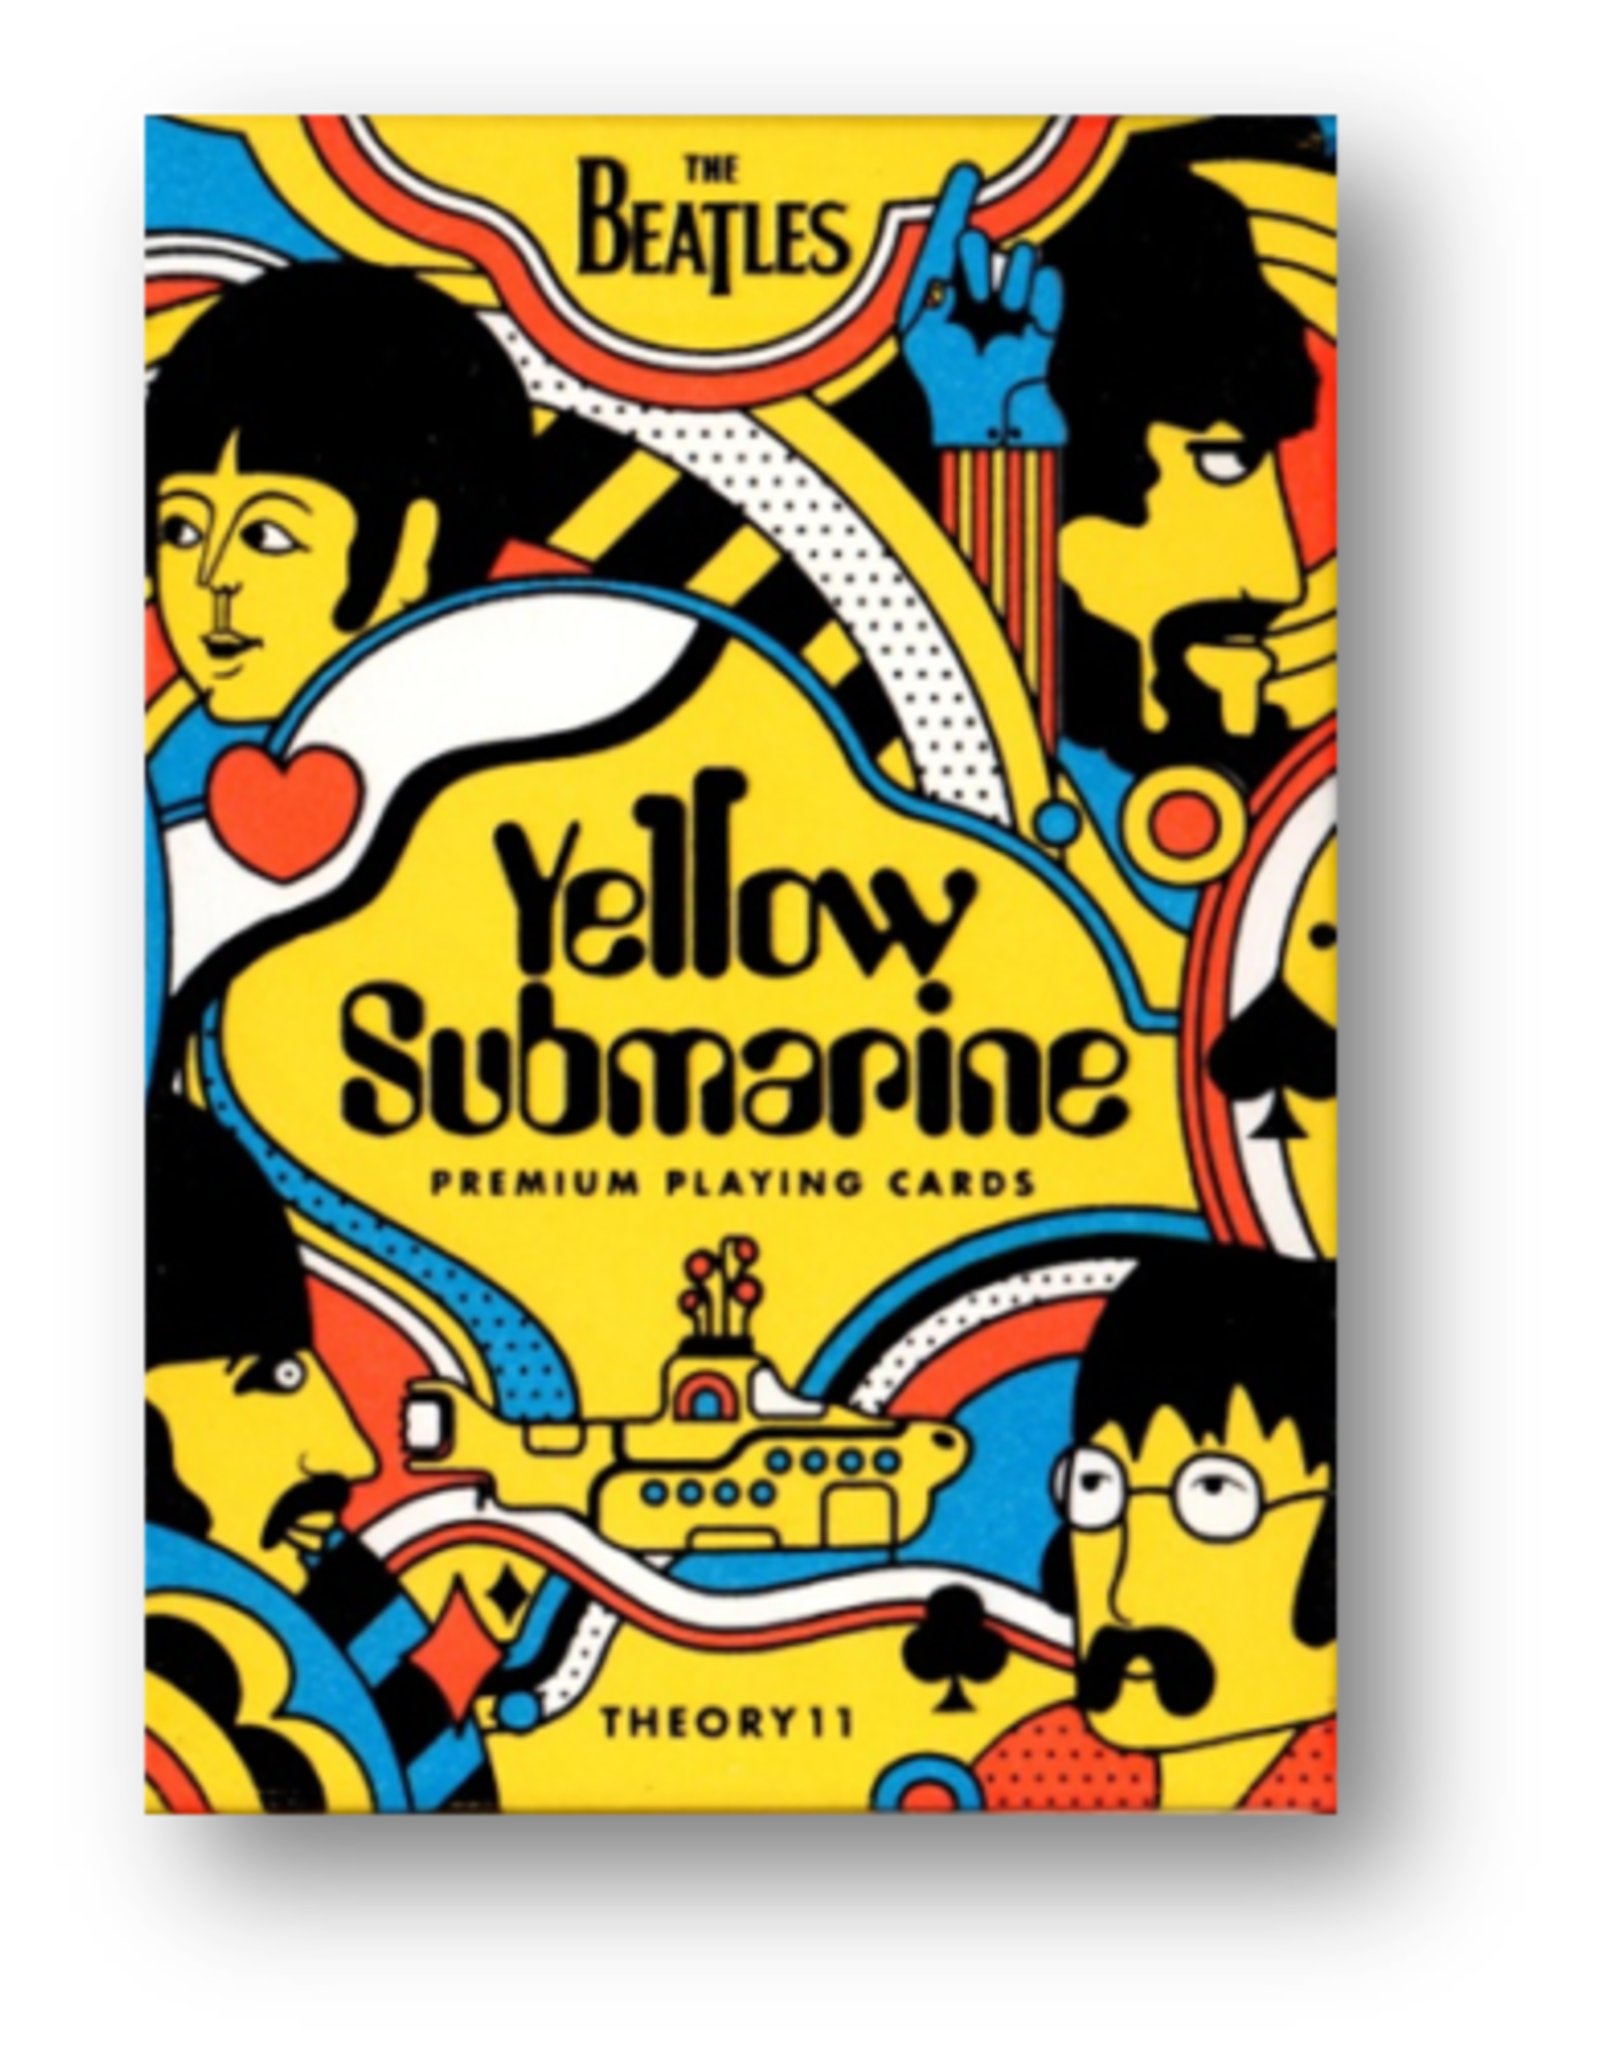 Theory 11 Theory 11 Playing Cards: Yellow Submarine